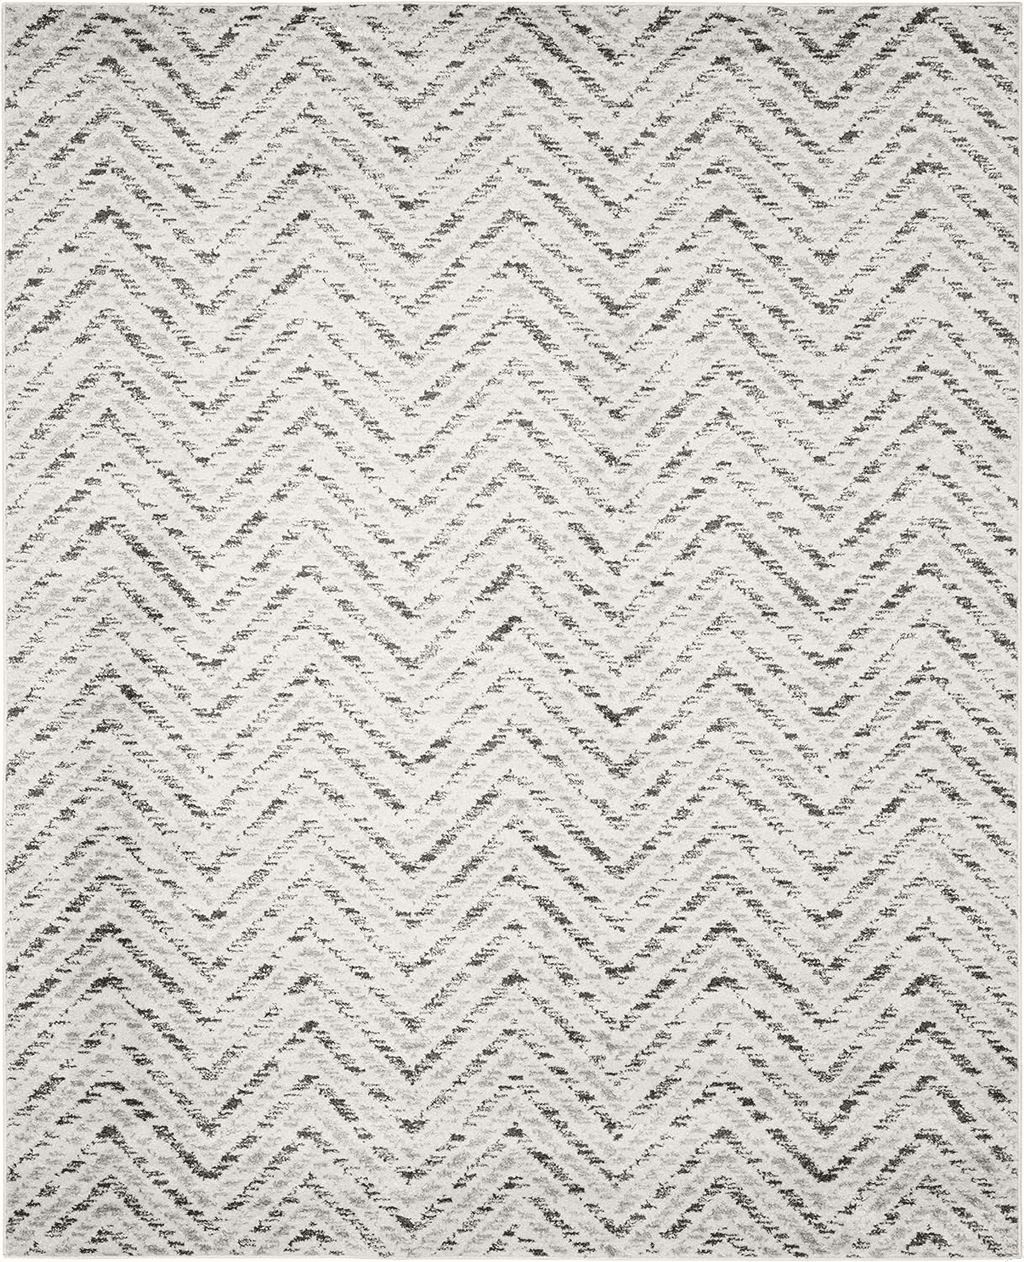 SAFAVIEH Adirondack Collection Area Rug - 9' x 12', Ivory & Charcoal, Chevron Design, Non-Shedding & Easy Care, Ideal for High Traffic Areas in Living Room, Bedroom (ADR104N)